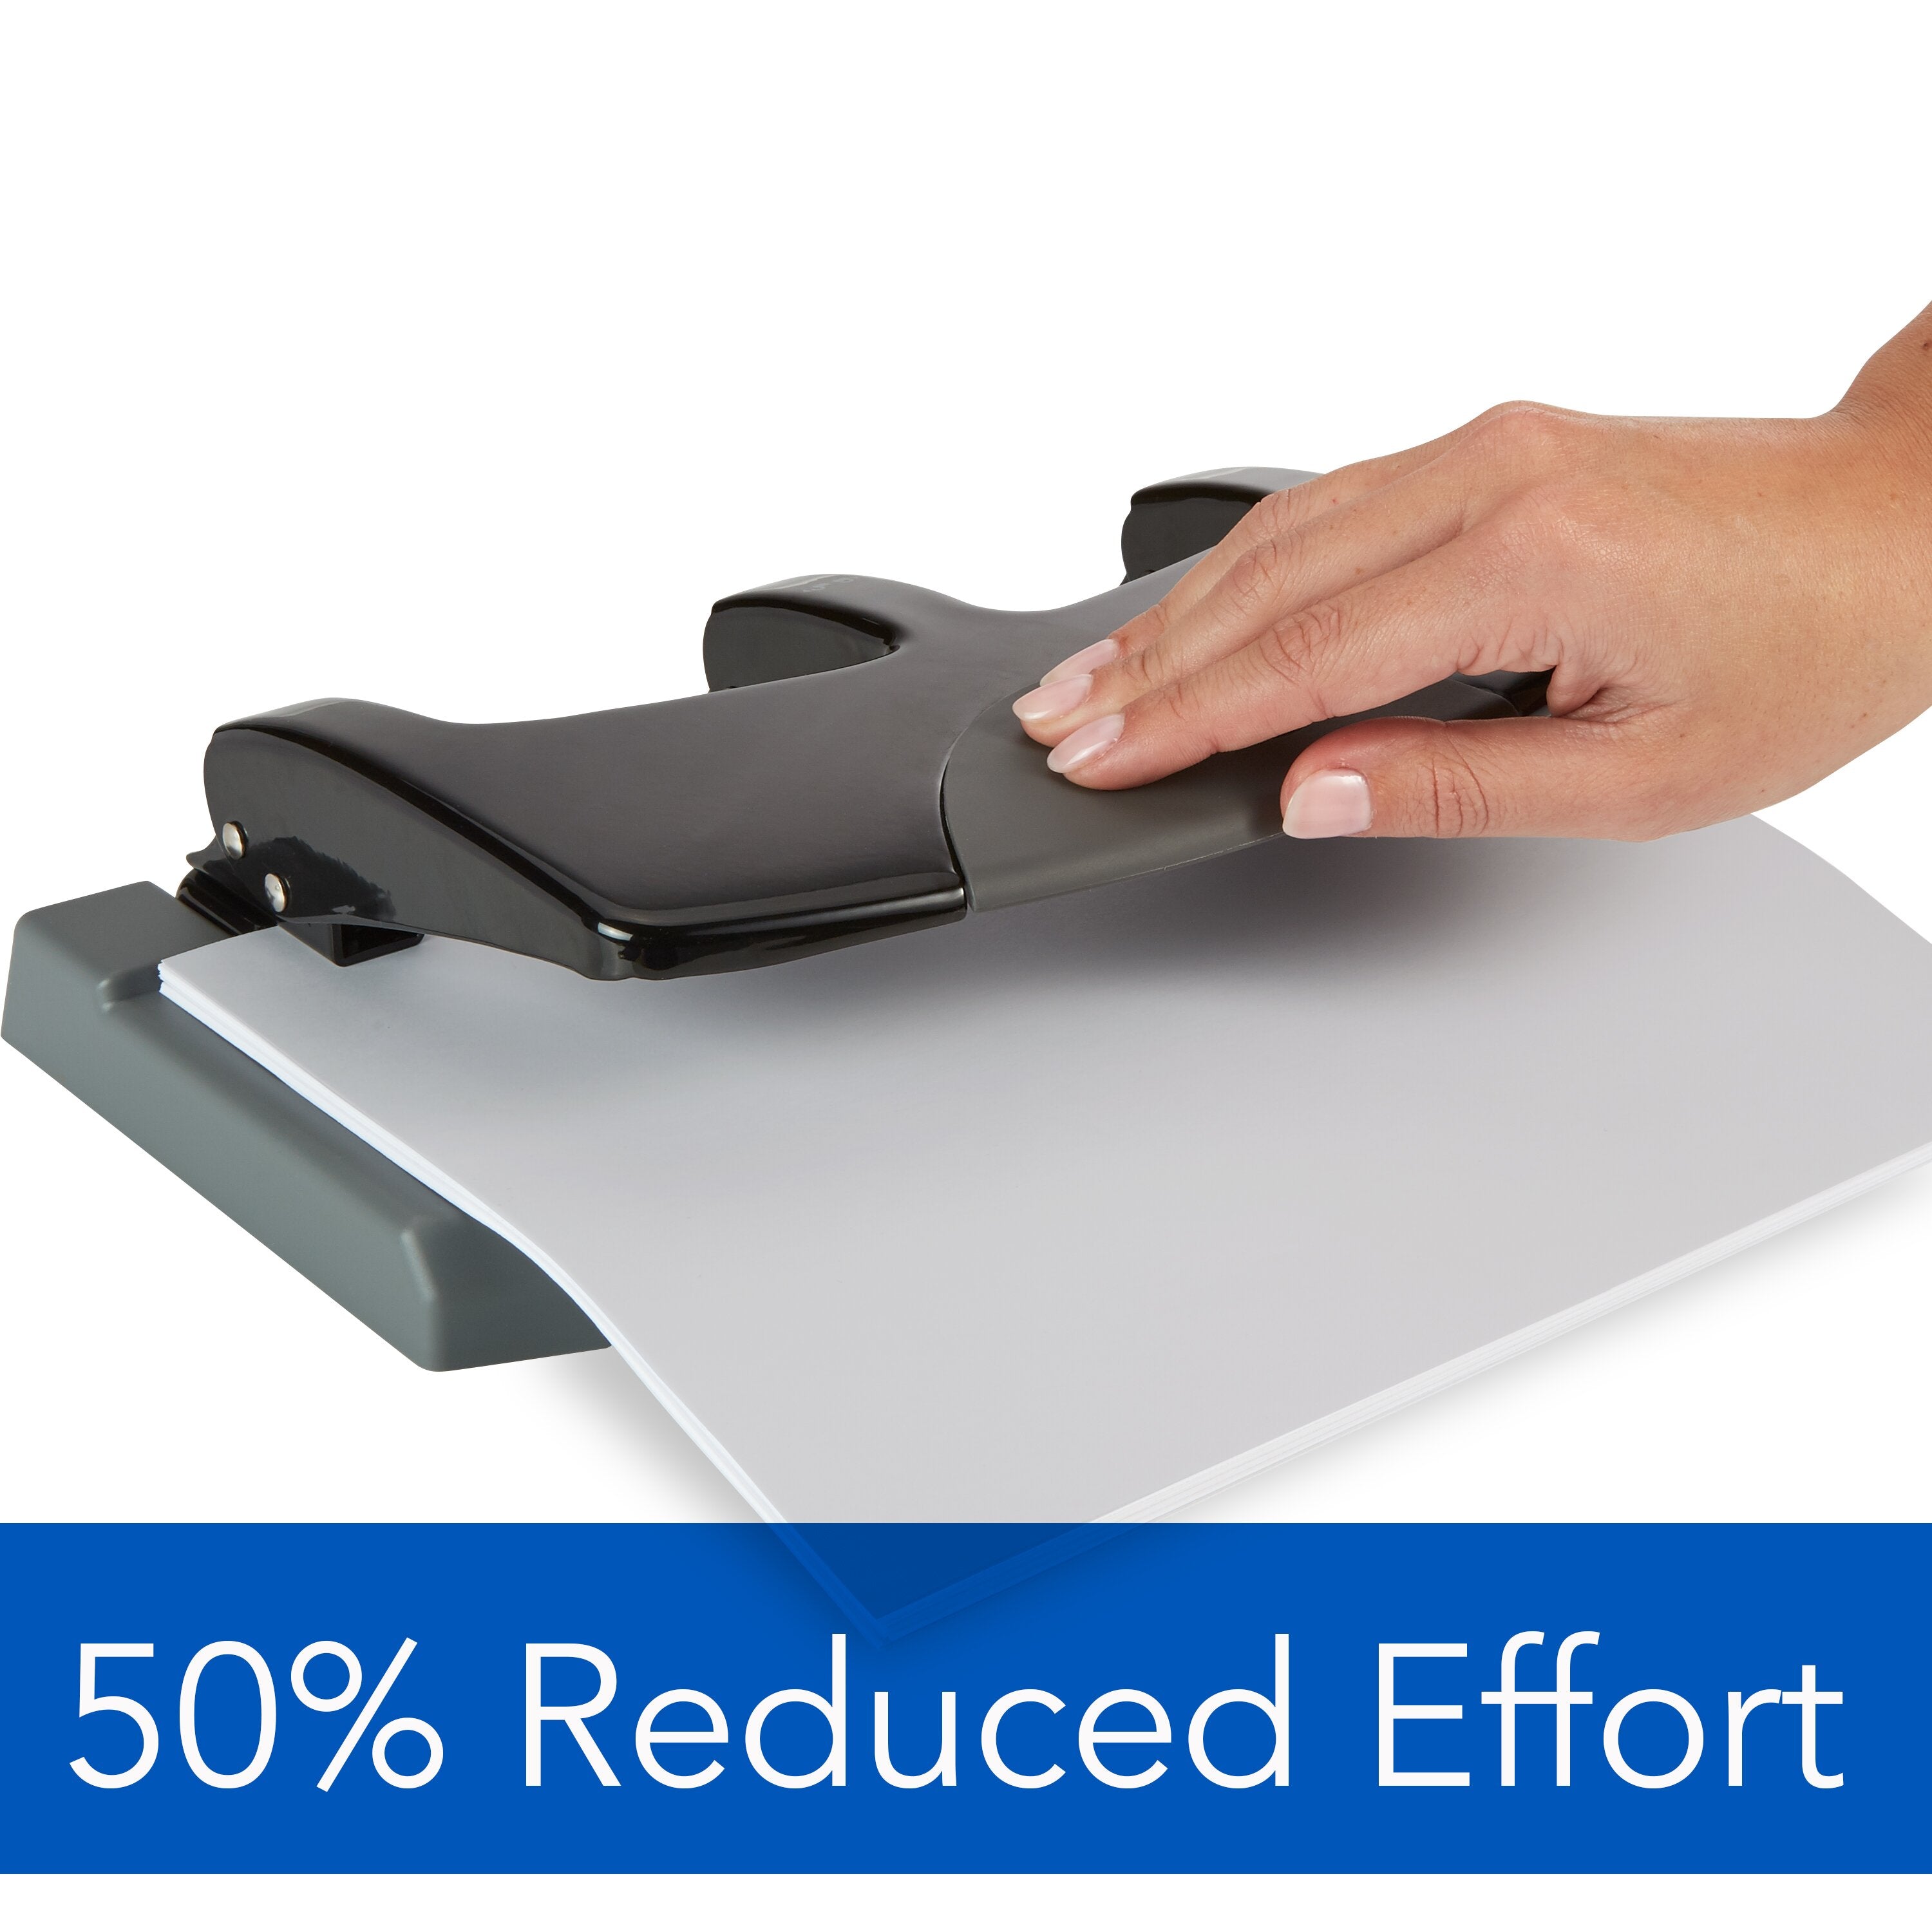 Swingline® SmartTouch™ 3-Hole Punch, 45 Sheets, Low Force